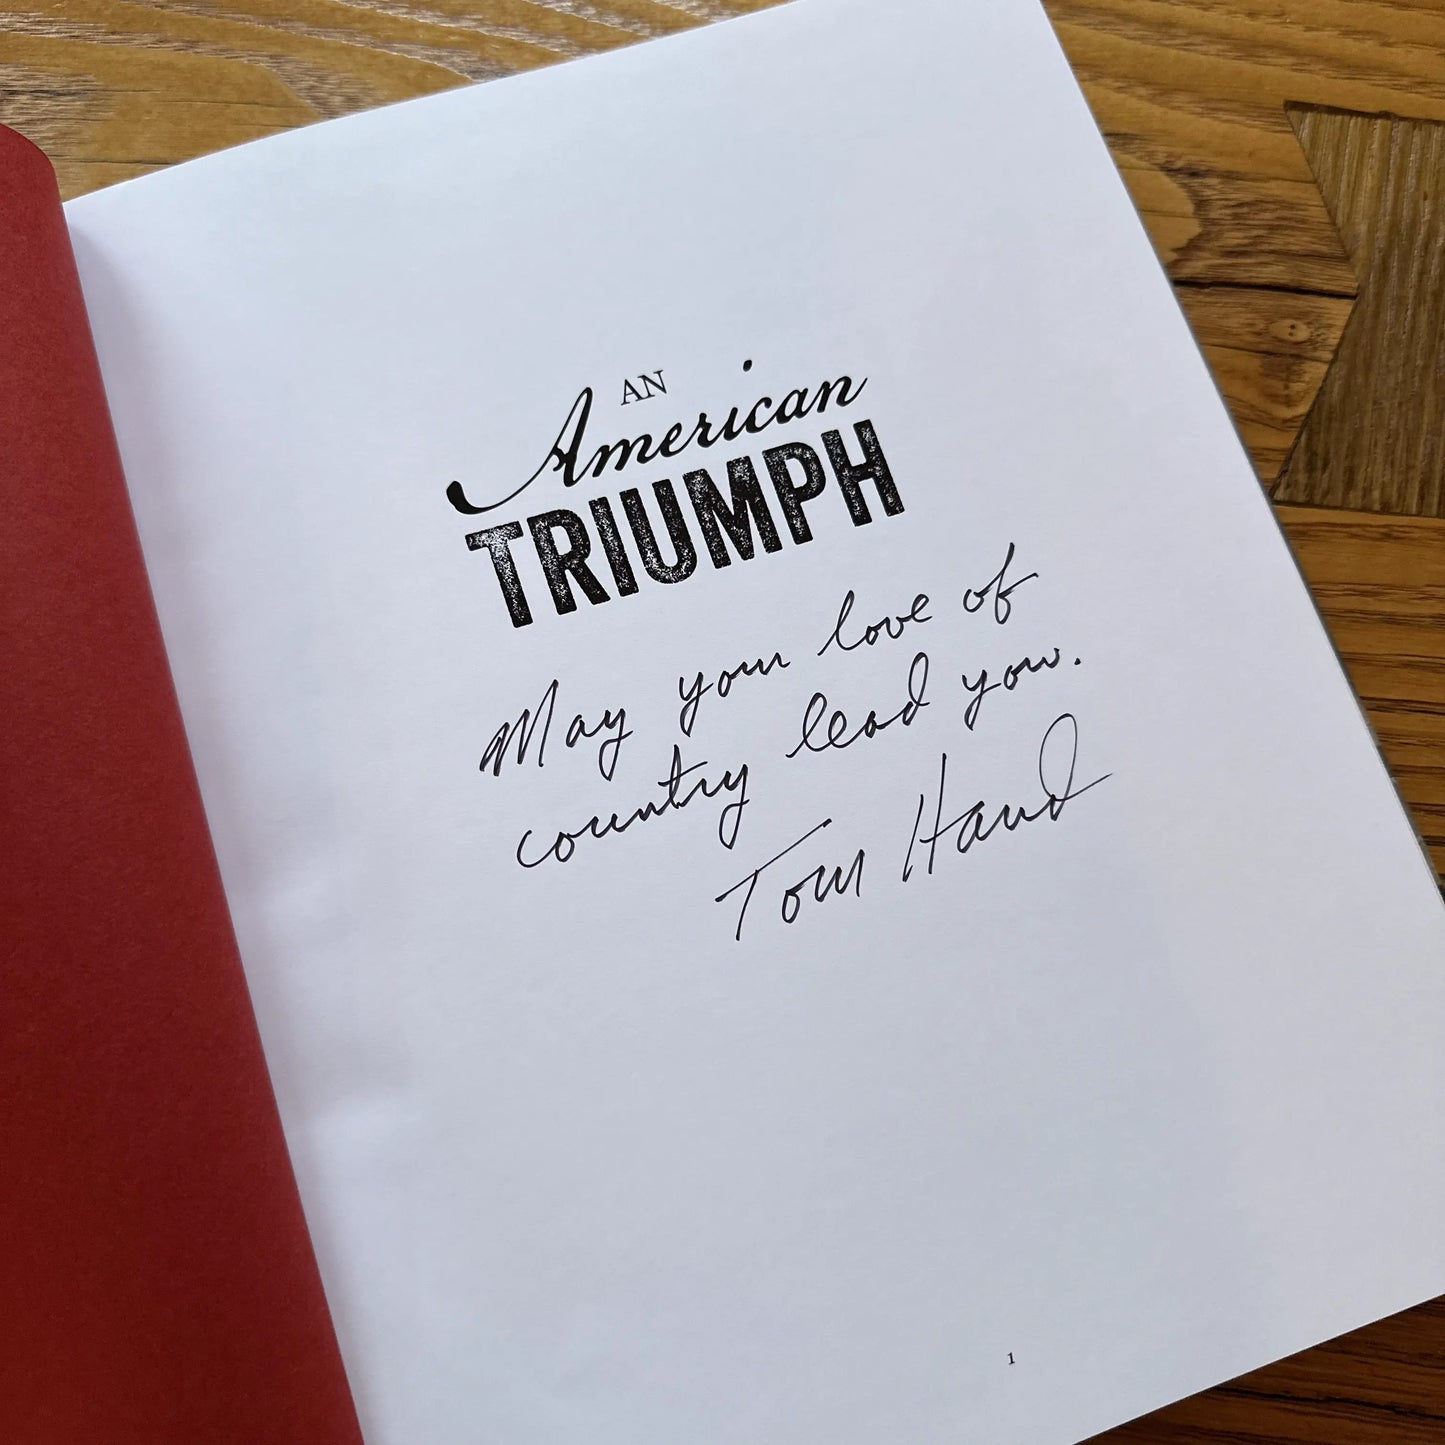 Signed copy of the "An American Triumph: America’s Founding Era through the Lives of Ben Franklin, George Washington, and John Adams" - Signed by the author Tom Hand from The History List store